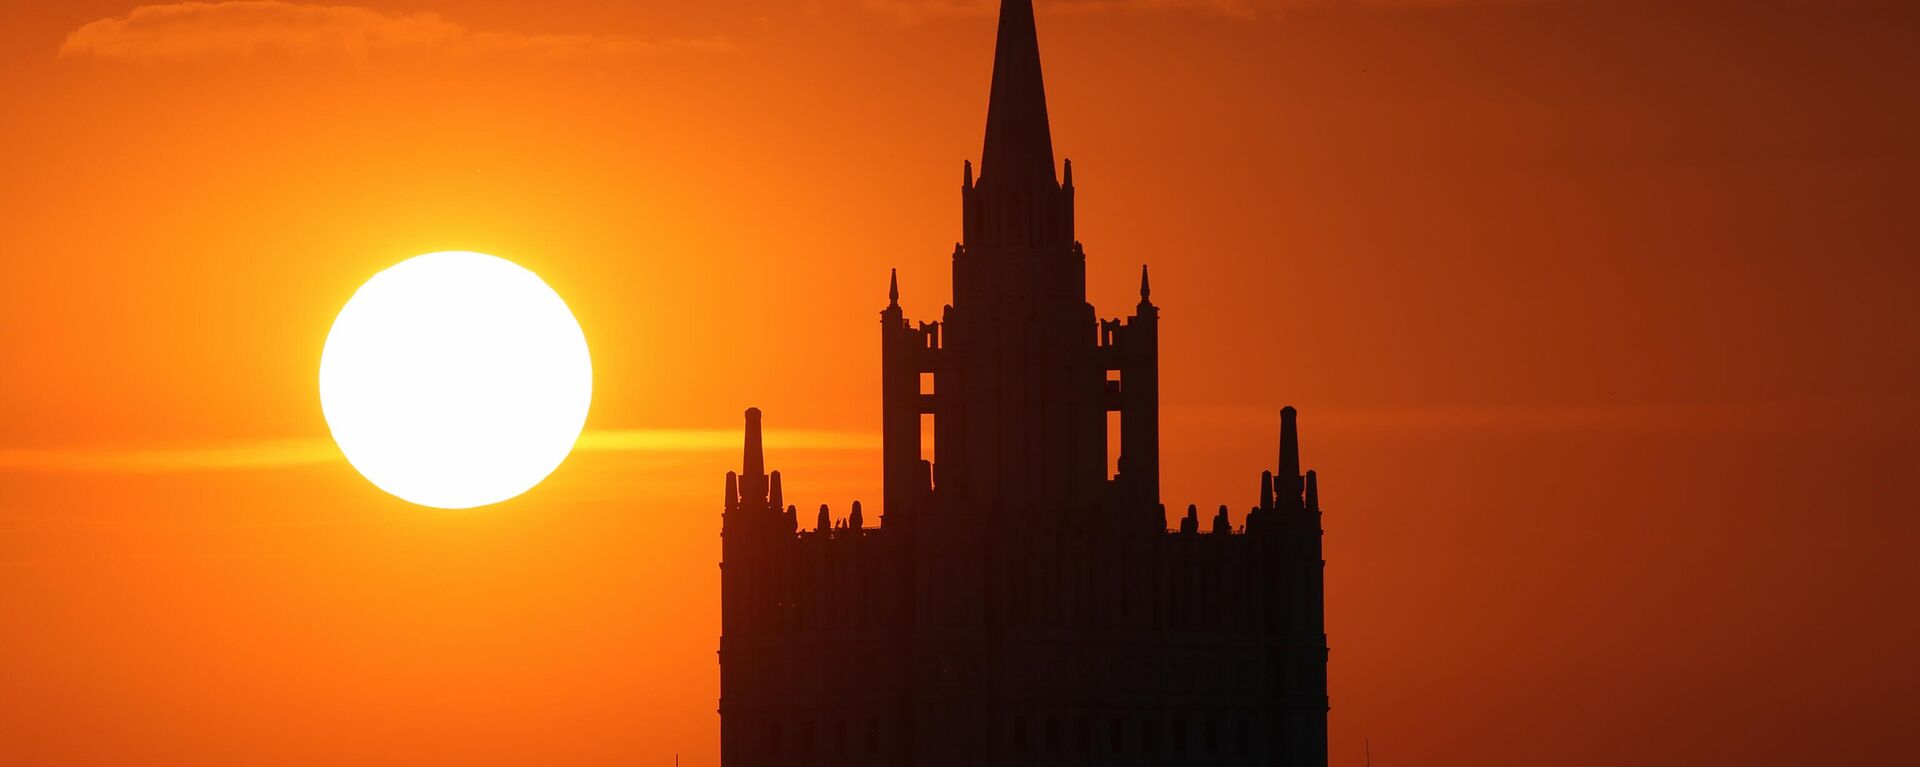 Russian Foreign Ministry's building is silhouetted against the setting sun, in Moscow, Russia. - Sputnik Africa, 1920, 31.03.2023